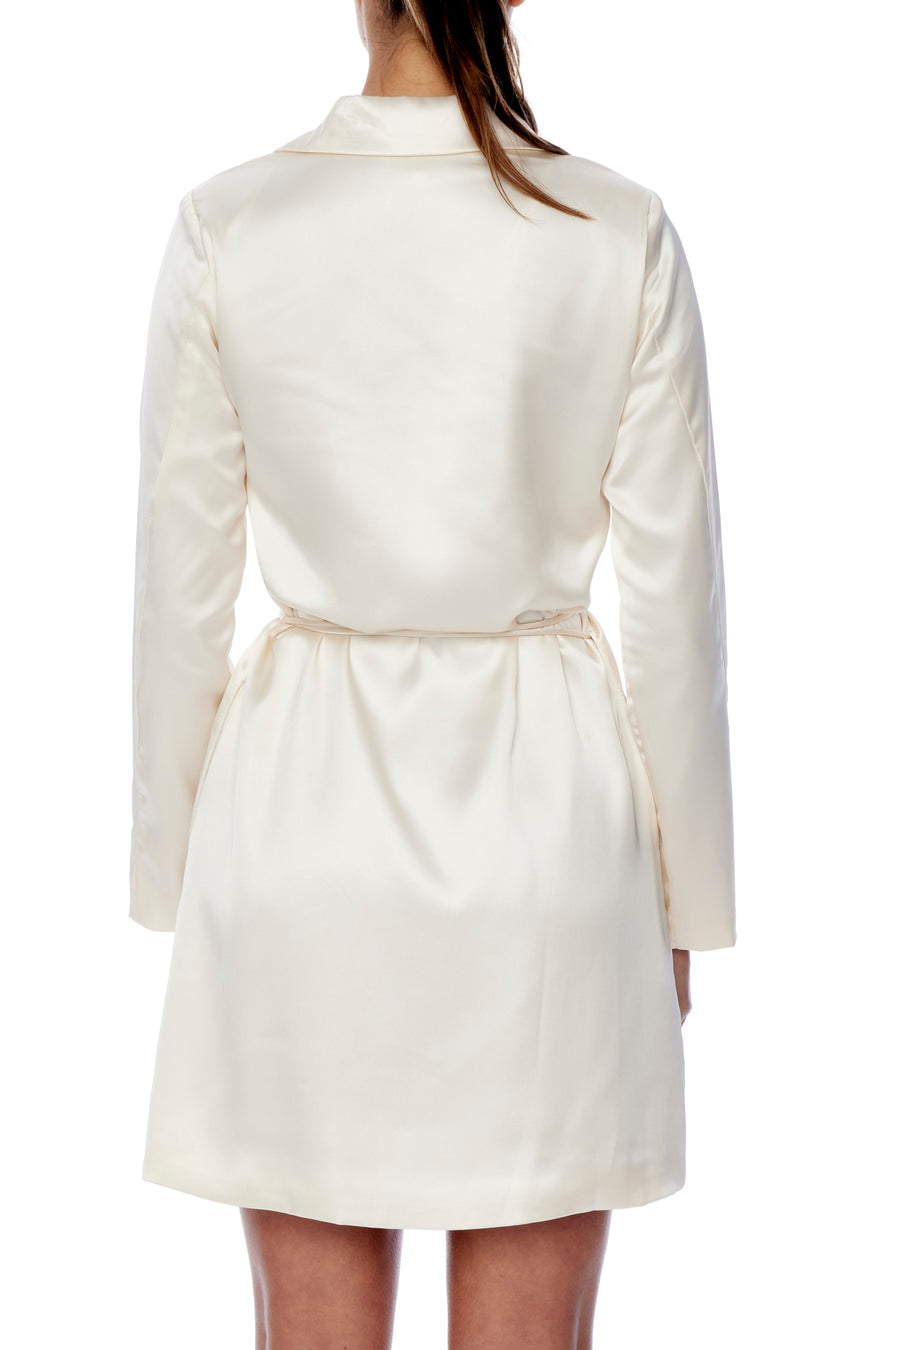 Collared, faux silk, wrap dress with attached belt that can be tied in front or at side - Back